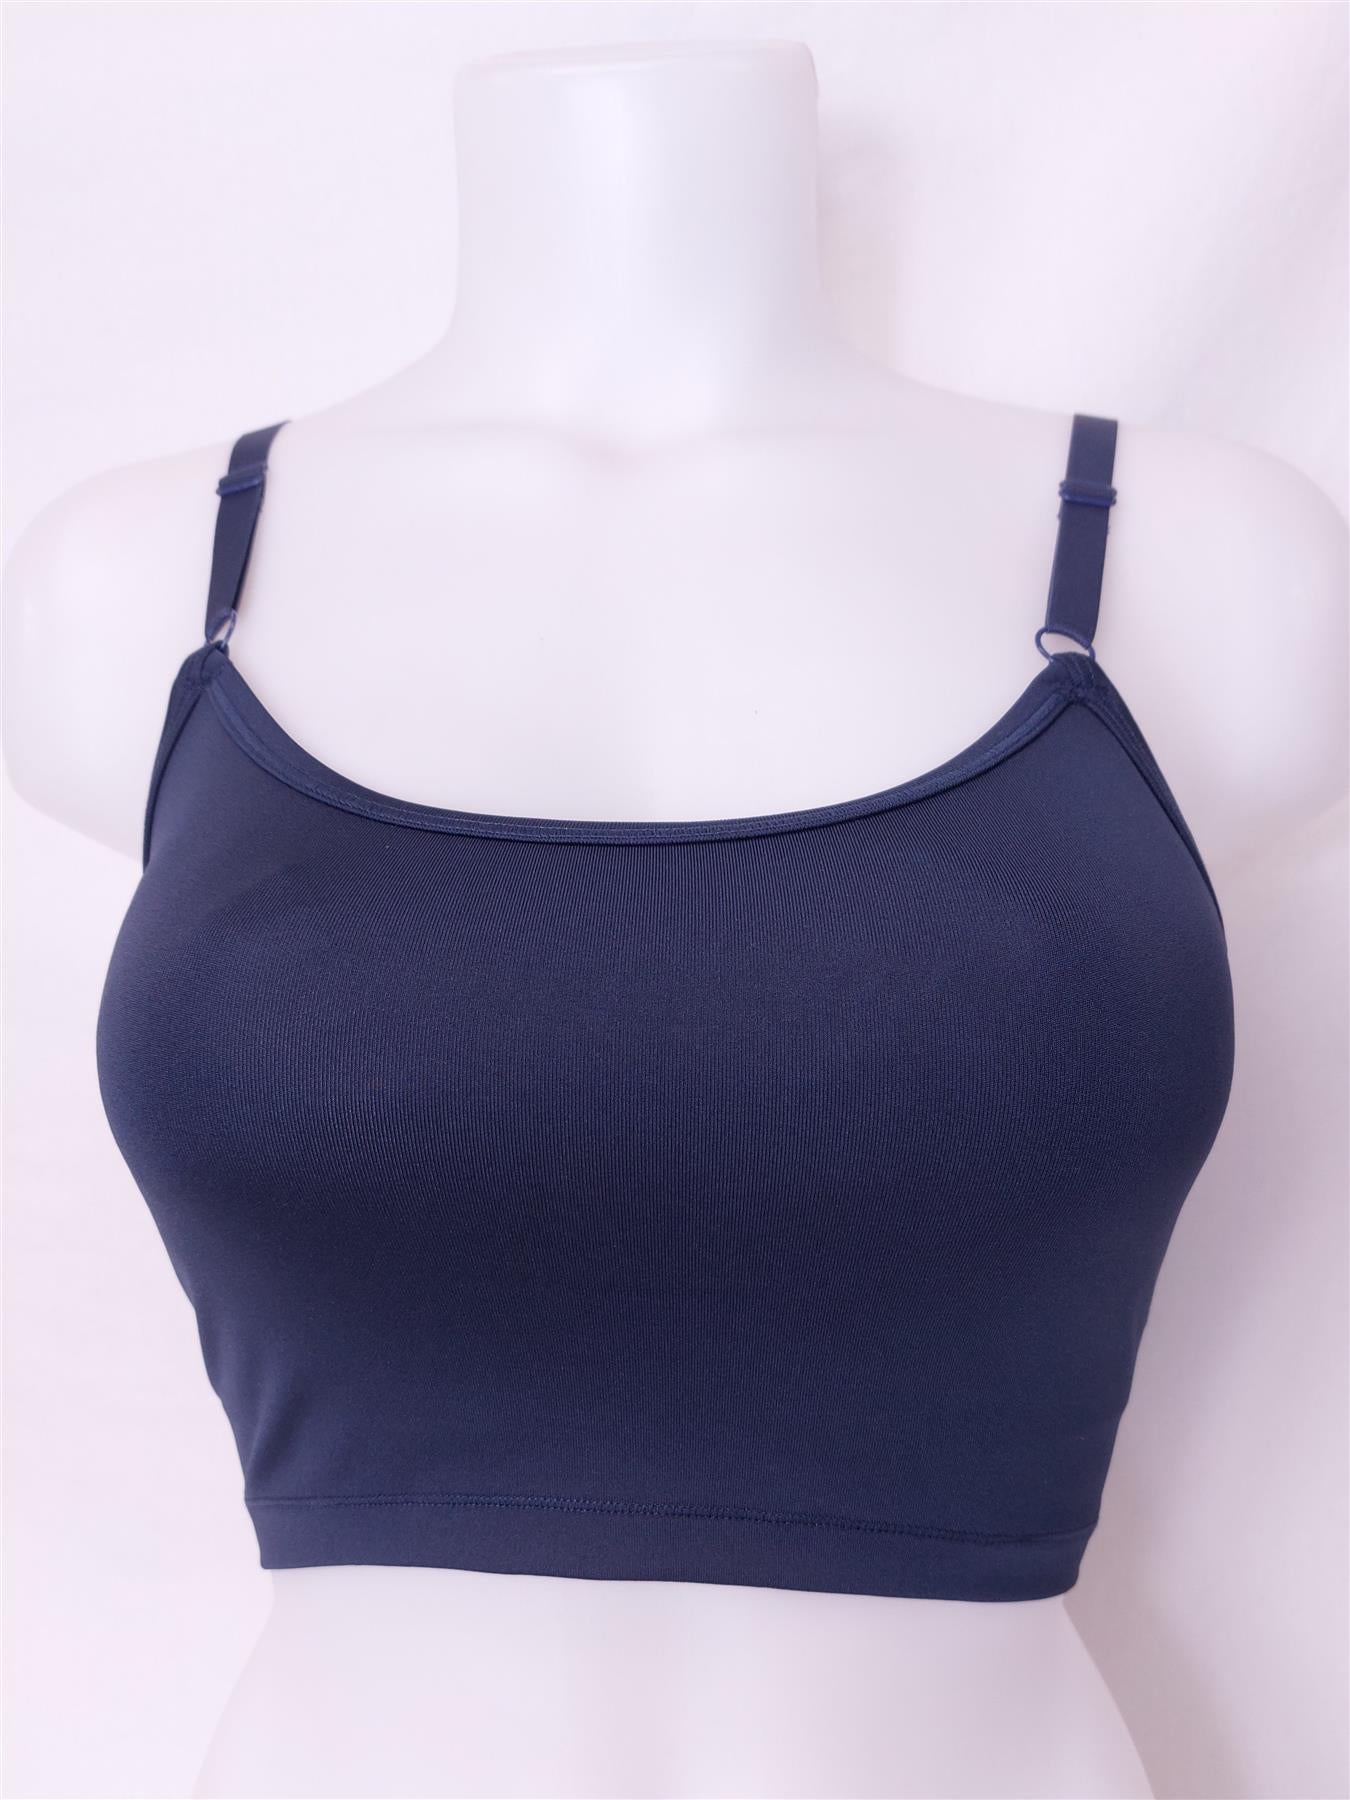 Marika Sports Bra Gym Yoga Top Soft Removable Padding Non-Wired Ruched Back Navy